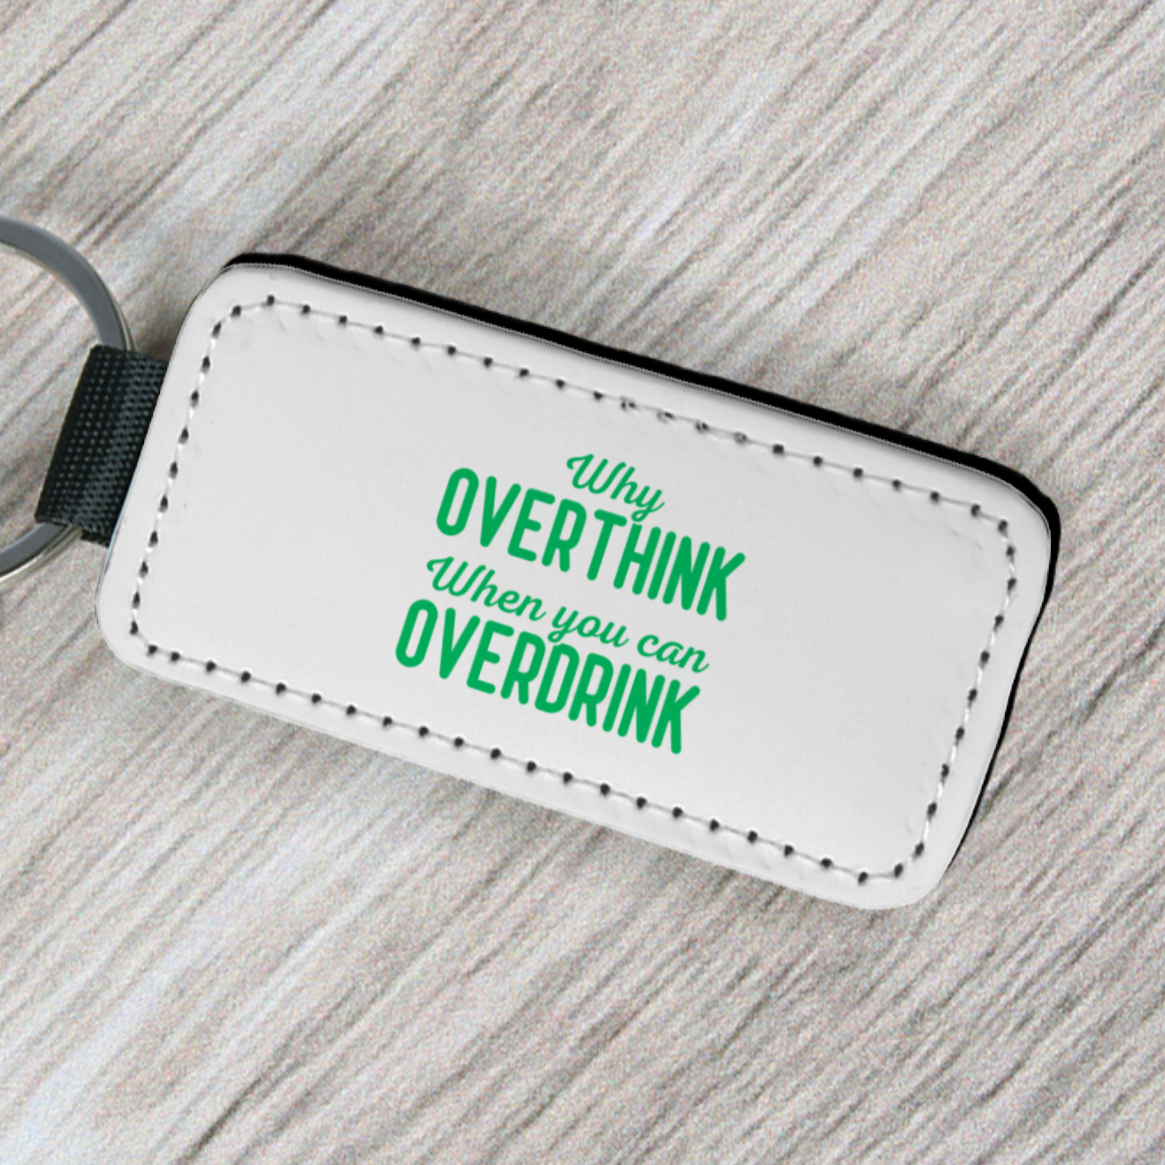 Why overthink when you can overdrink! - Key Tag